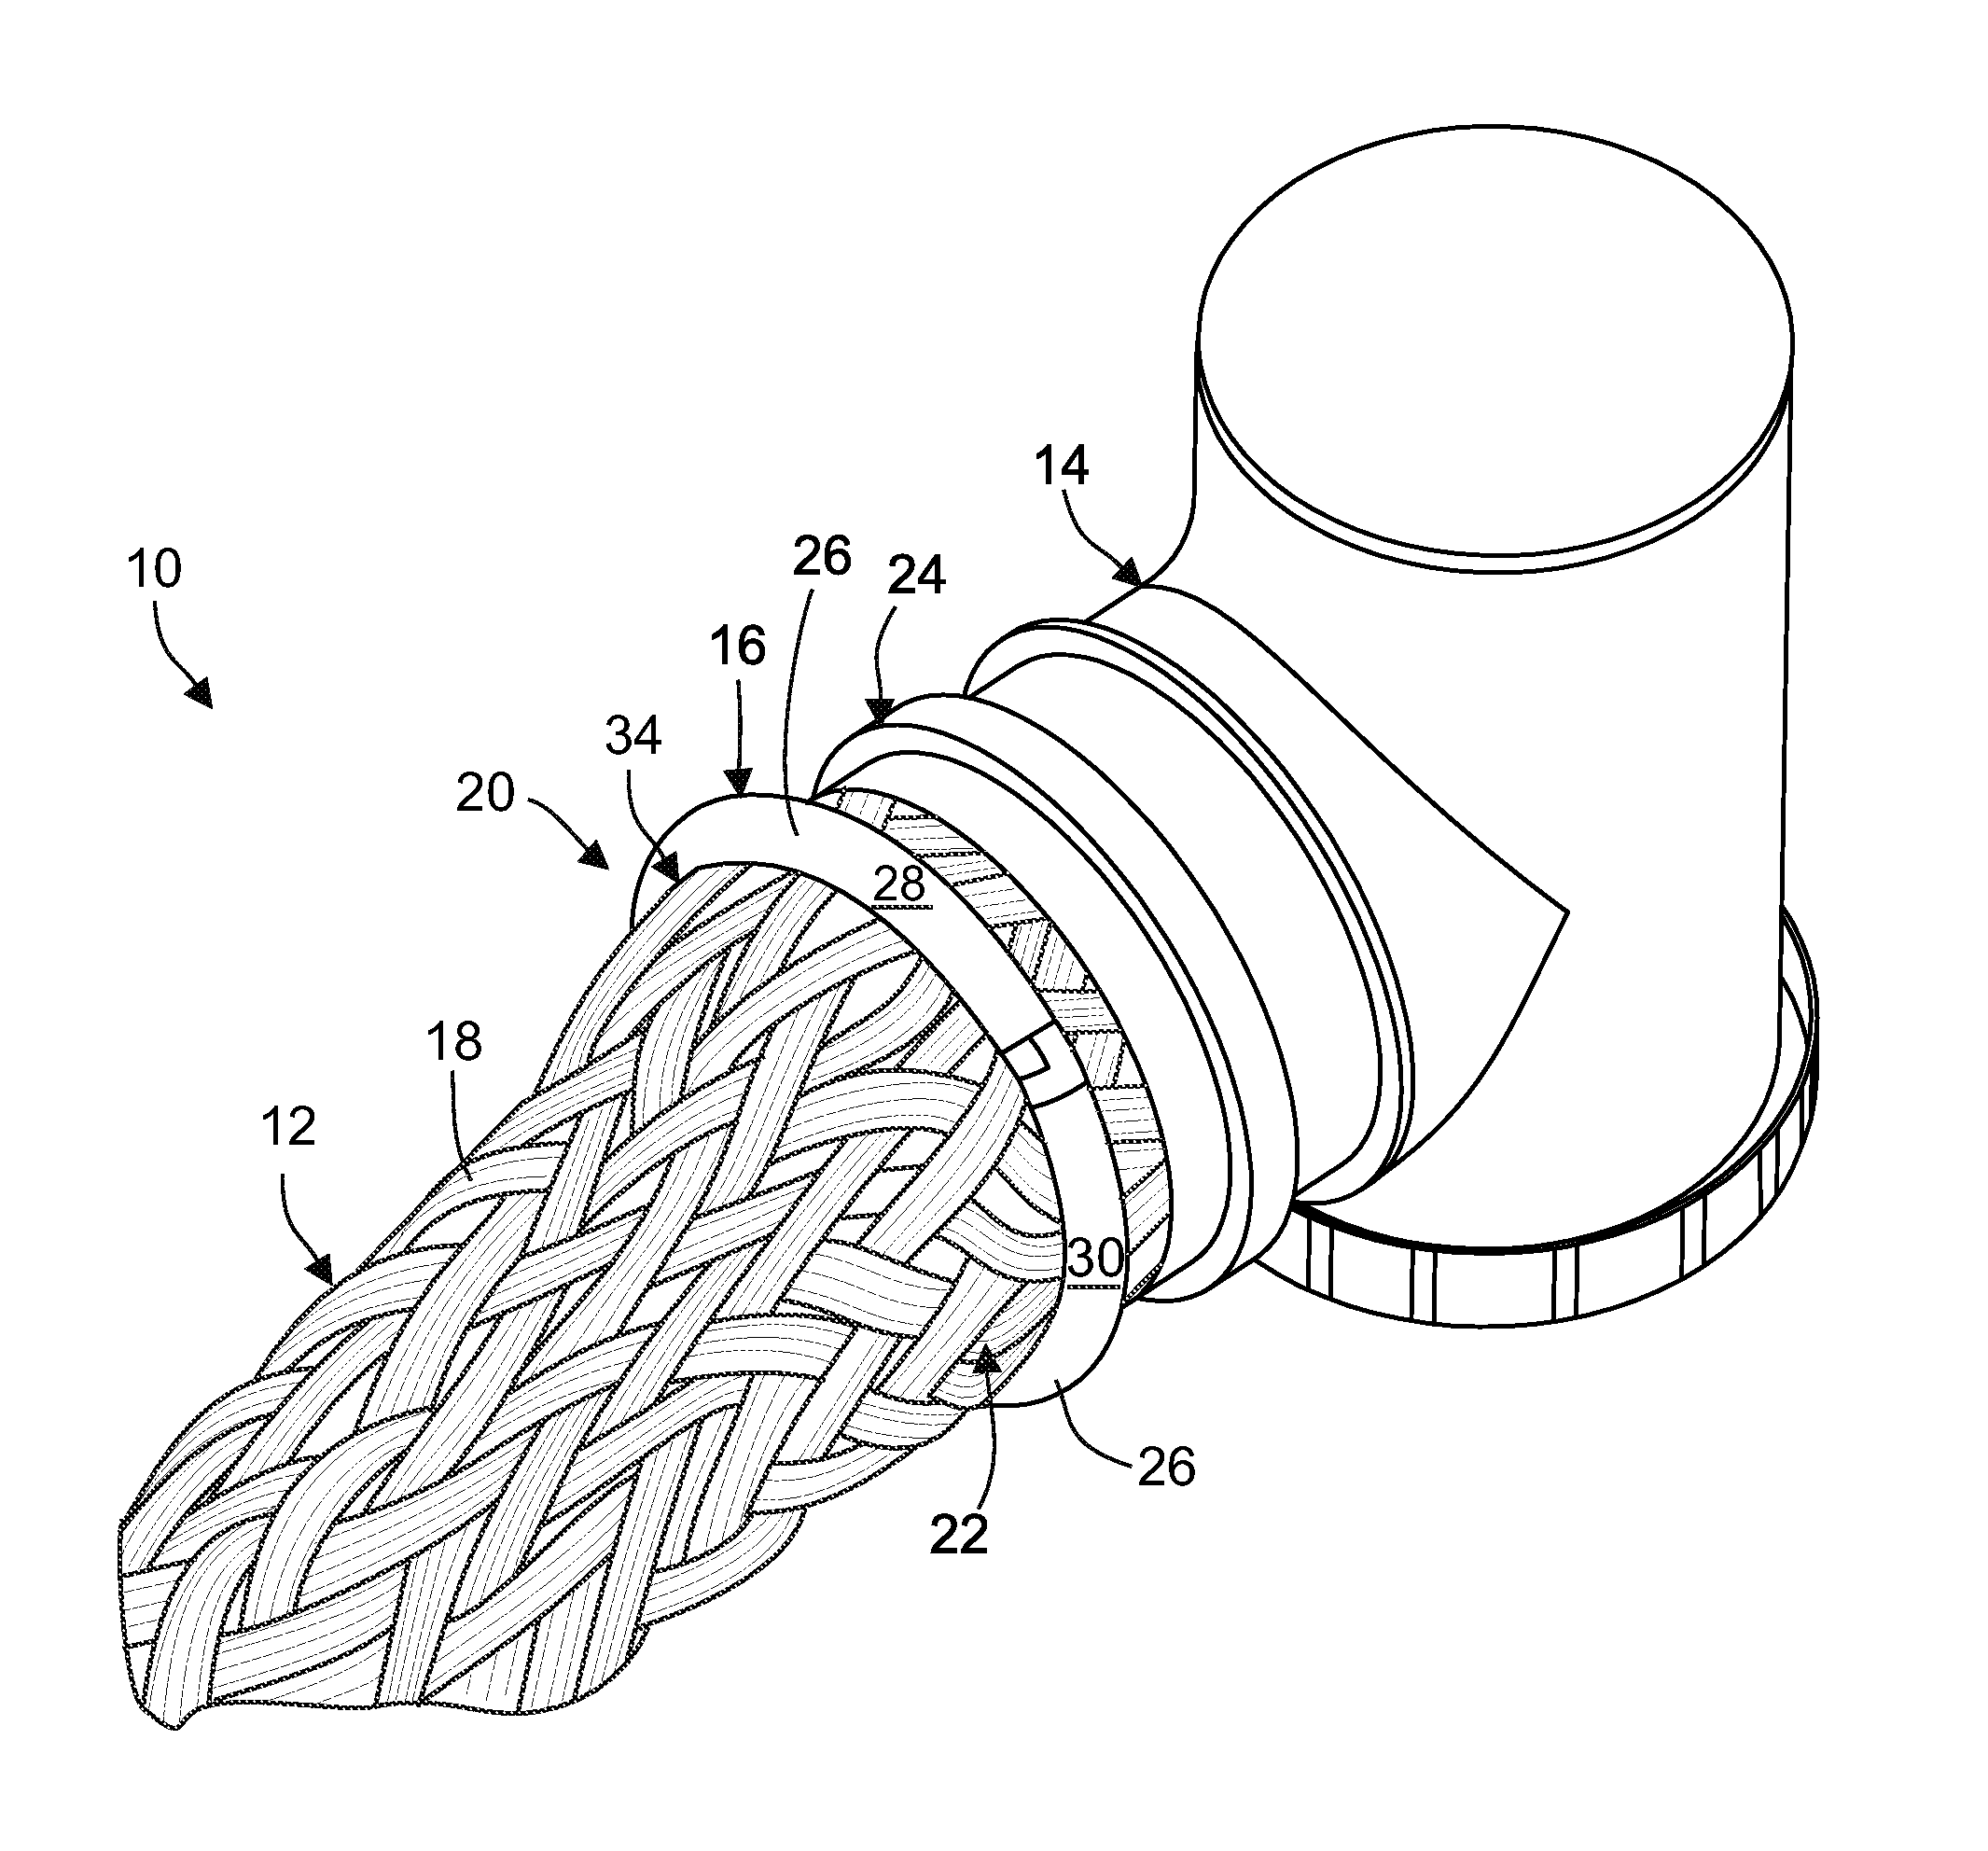 Attachment ring for attaching a shield of an electrical cable to a backshell